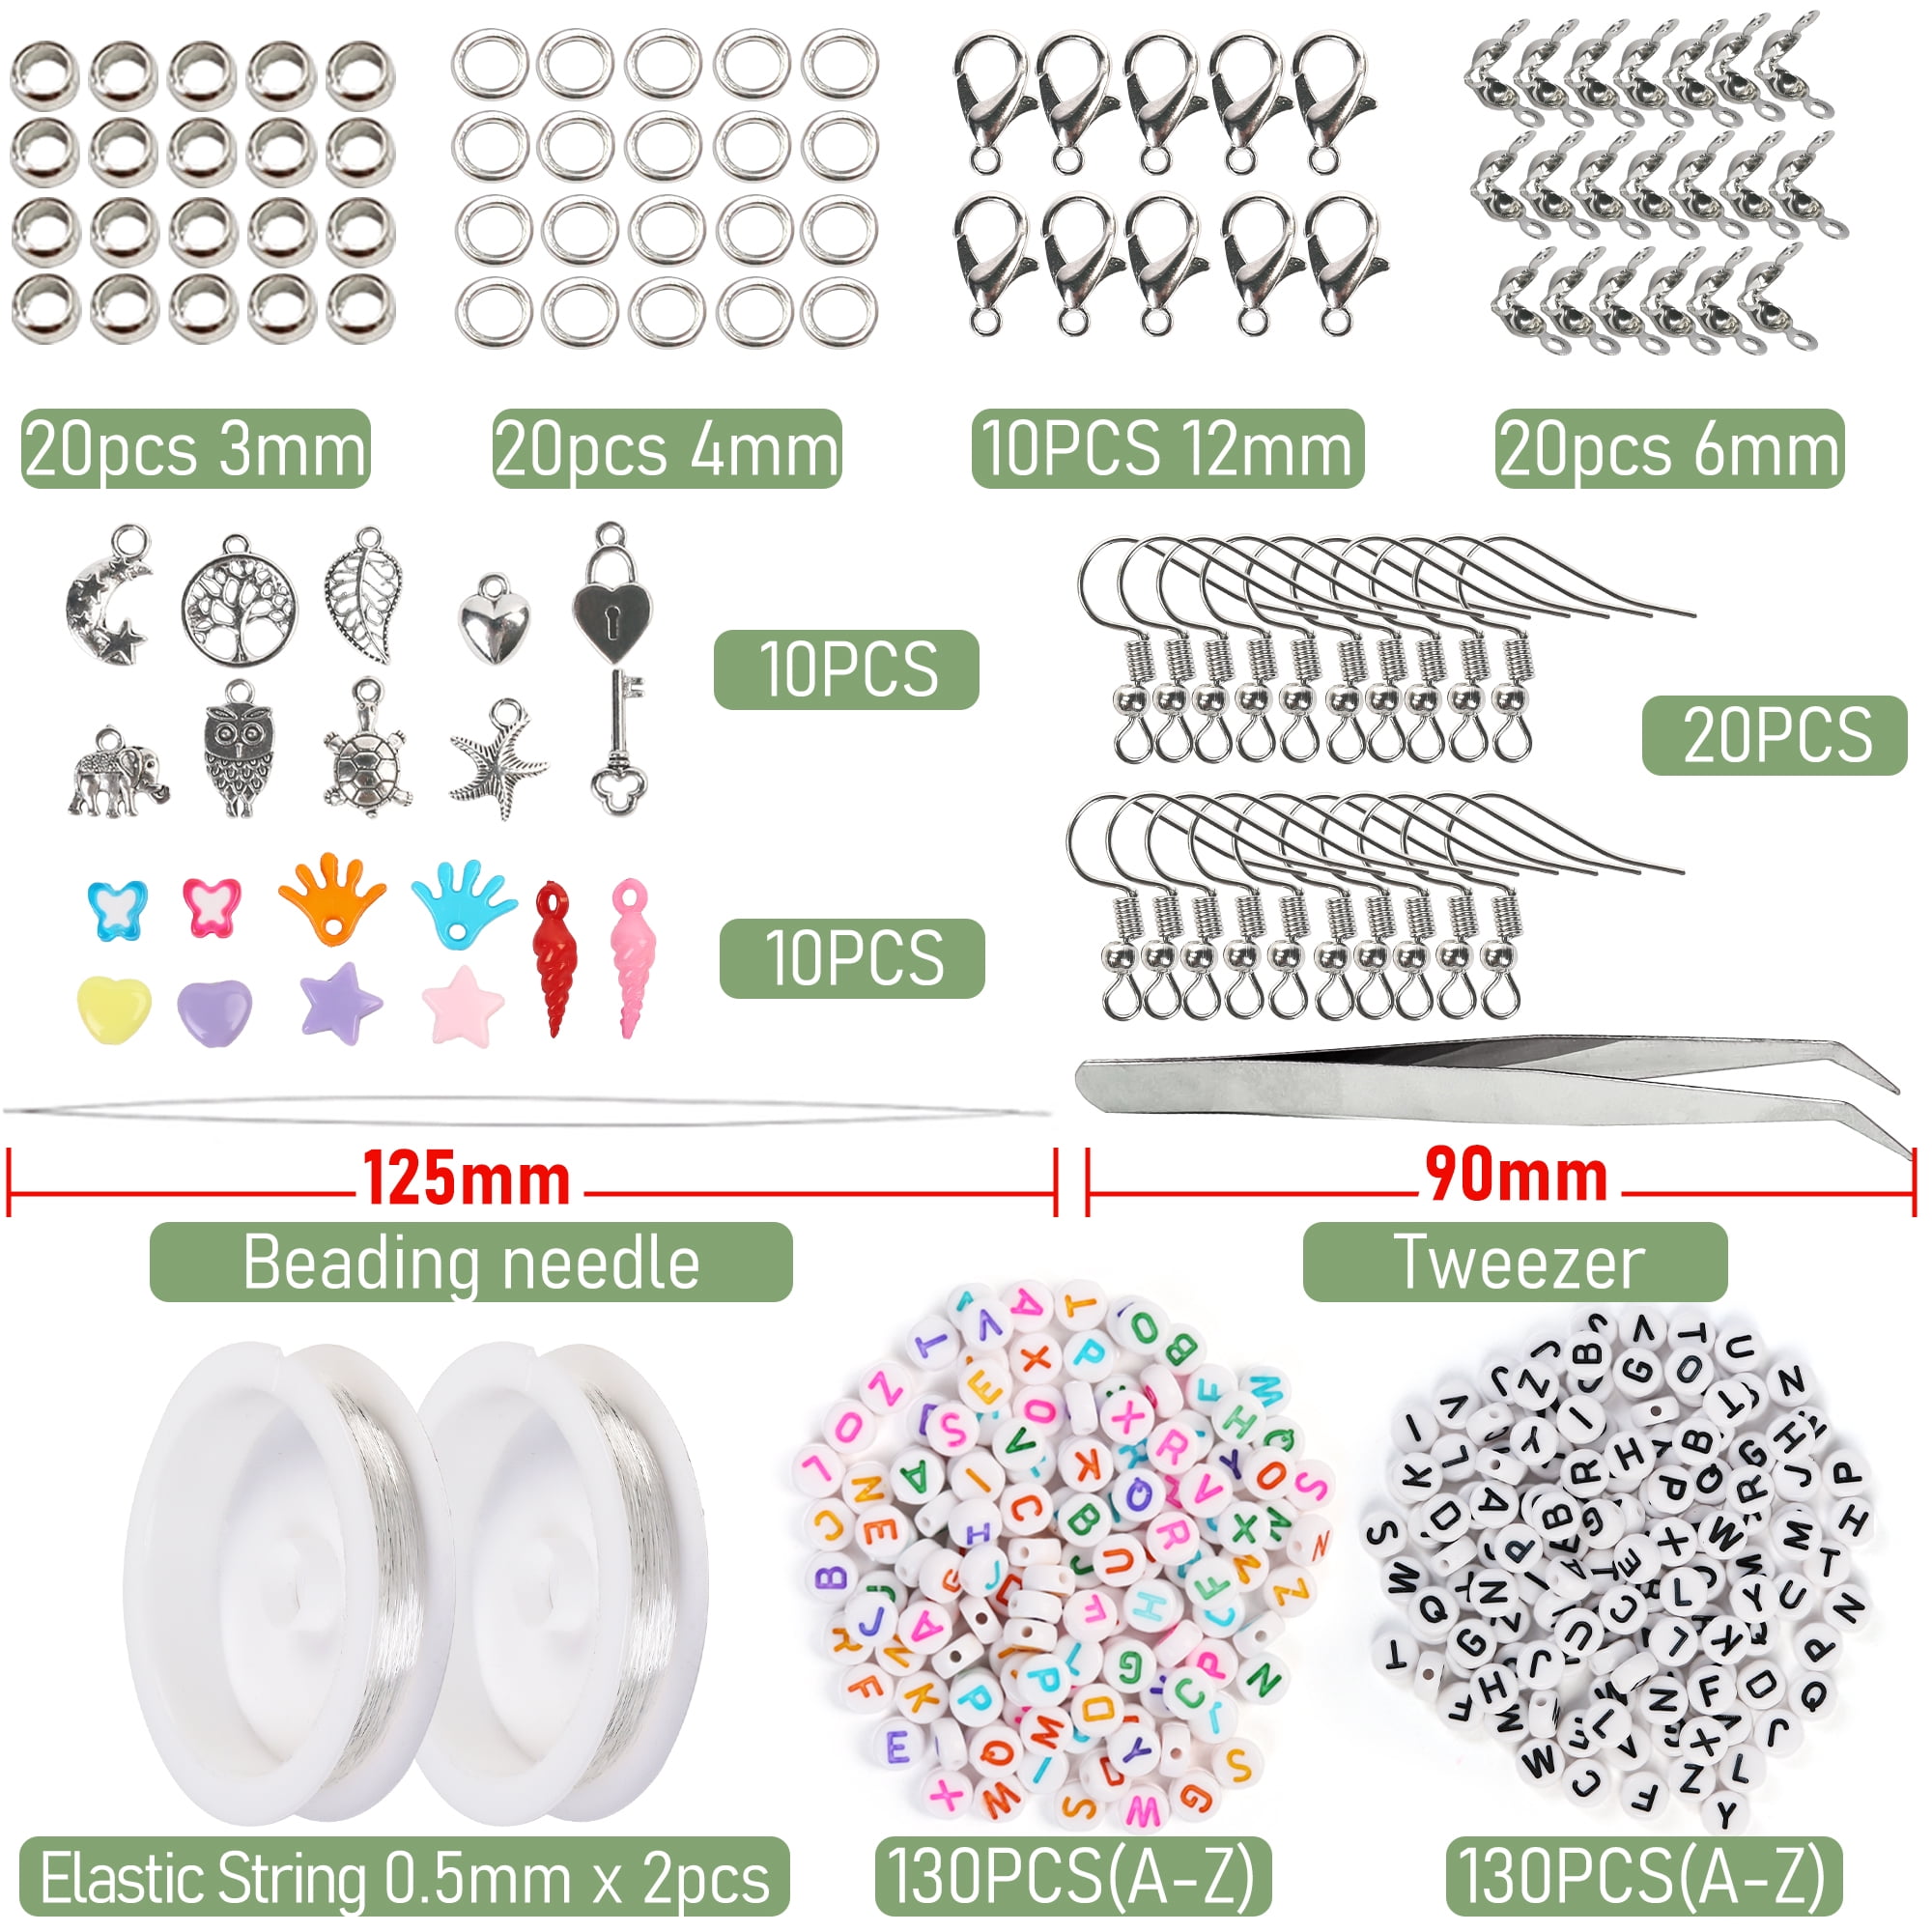 Lotfancy 40000pcs 2mm Glass Seed Beads for Jewelry Making Kit, Multi-Color, Size: Small